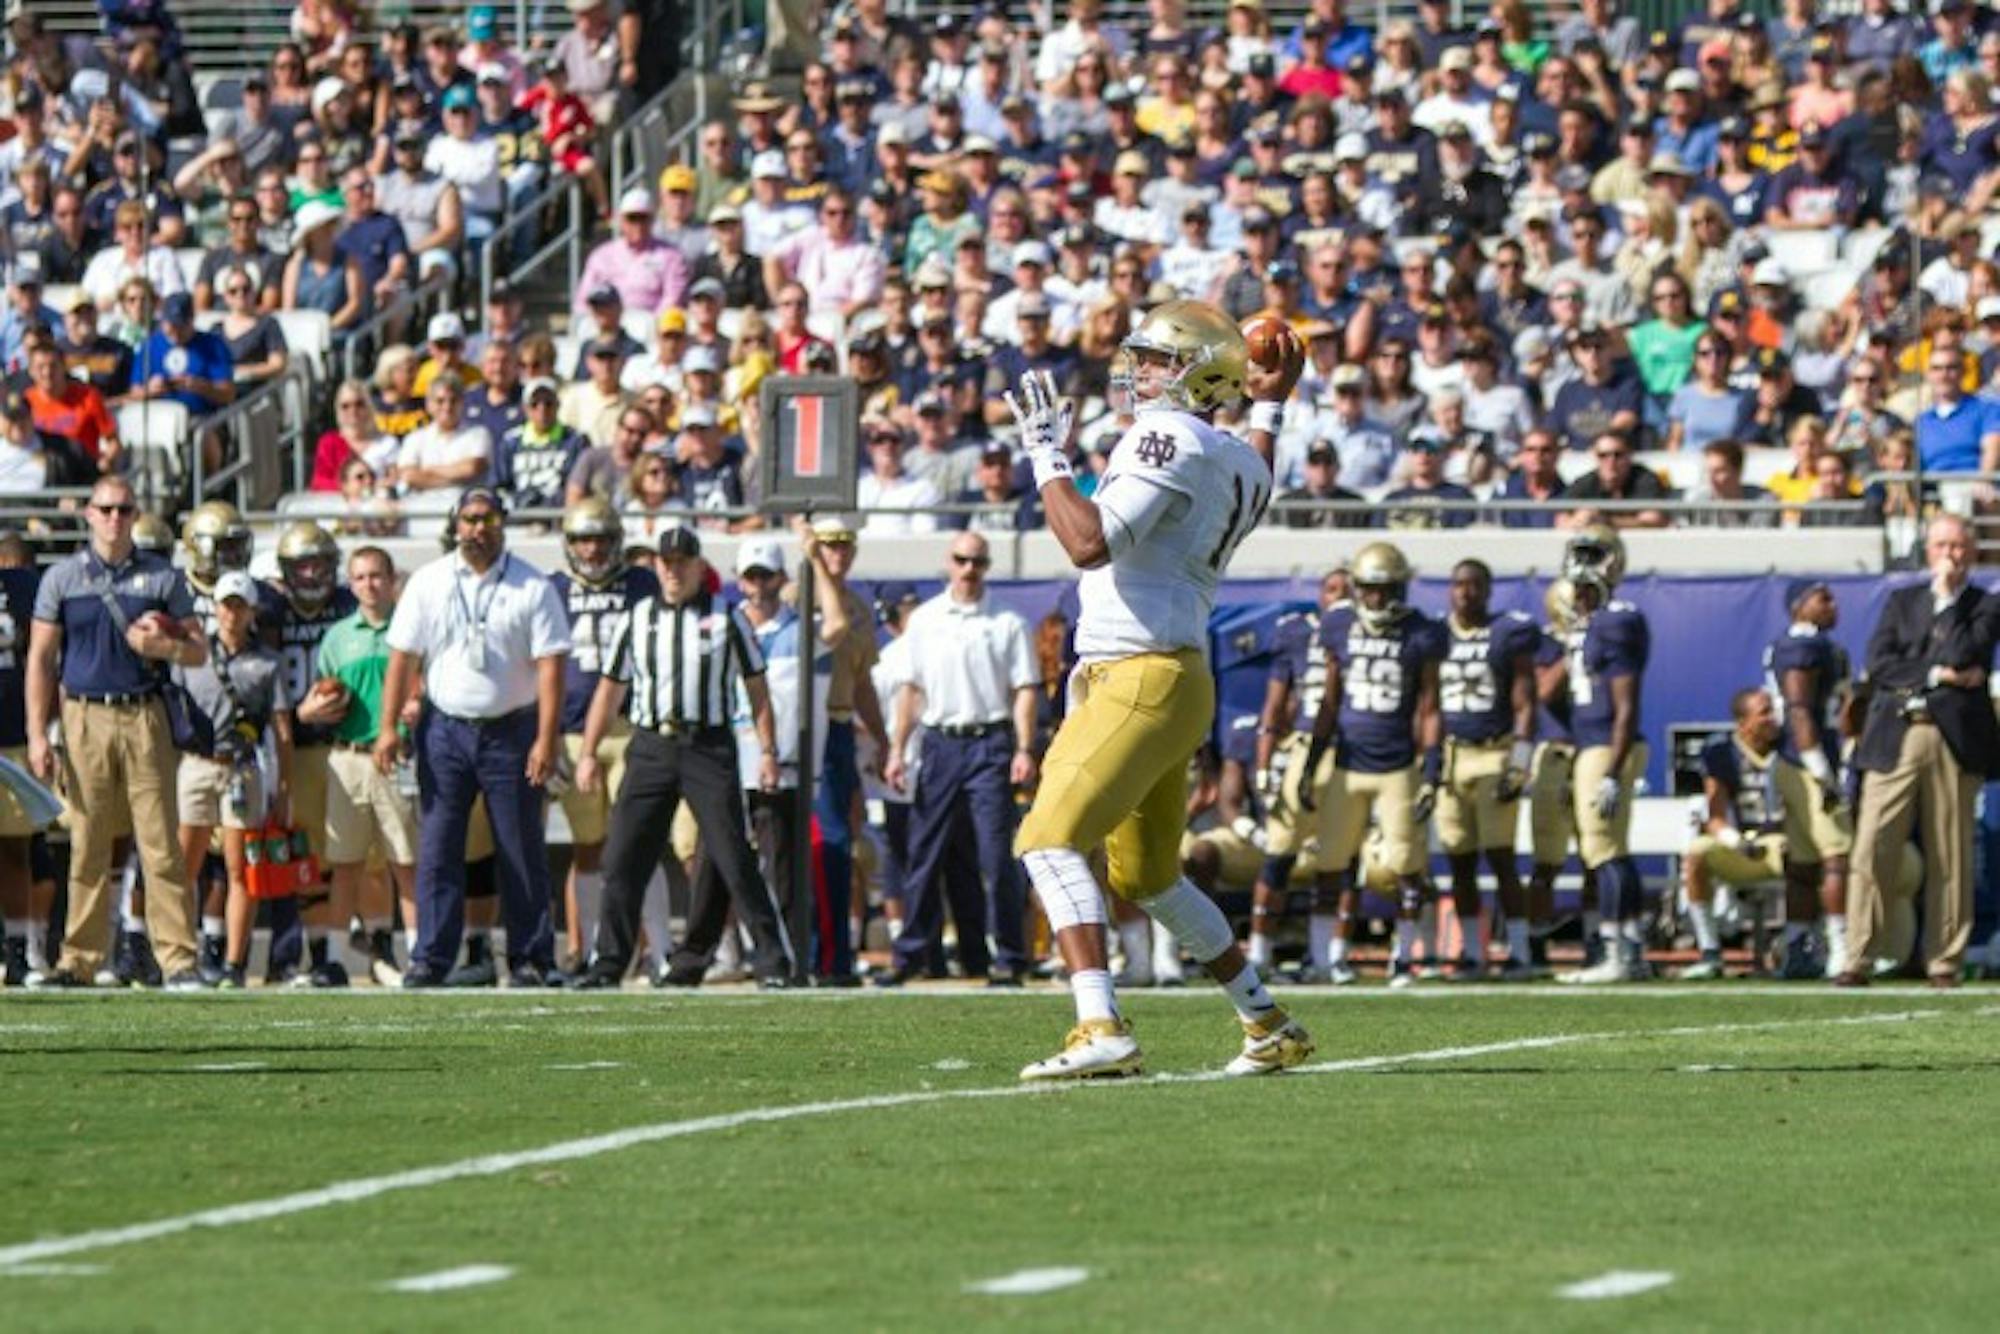 DeShone Kizer winds up to throw a pass toward the sideline.